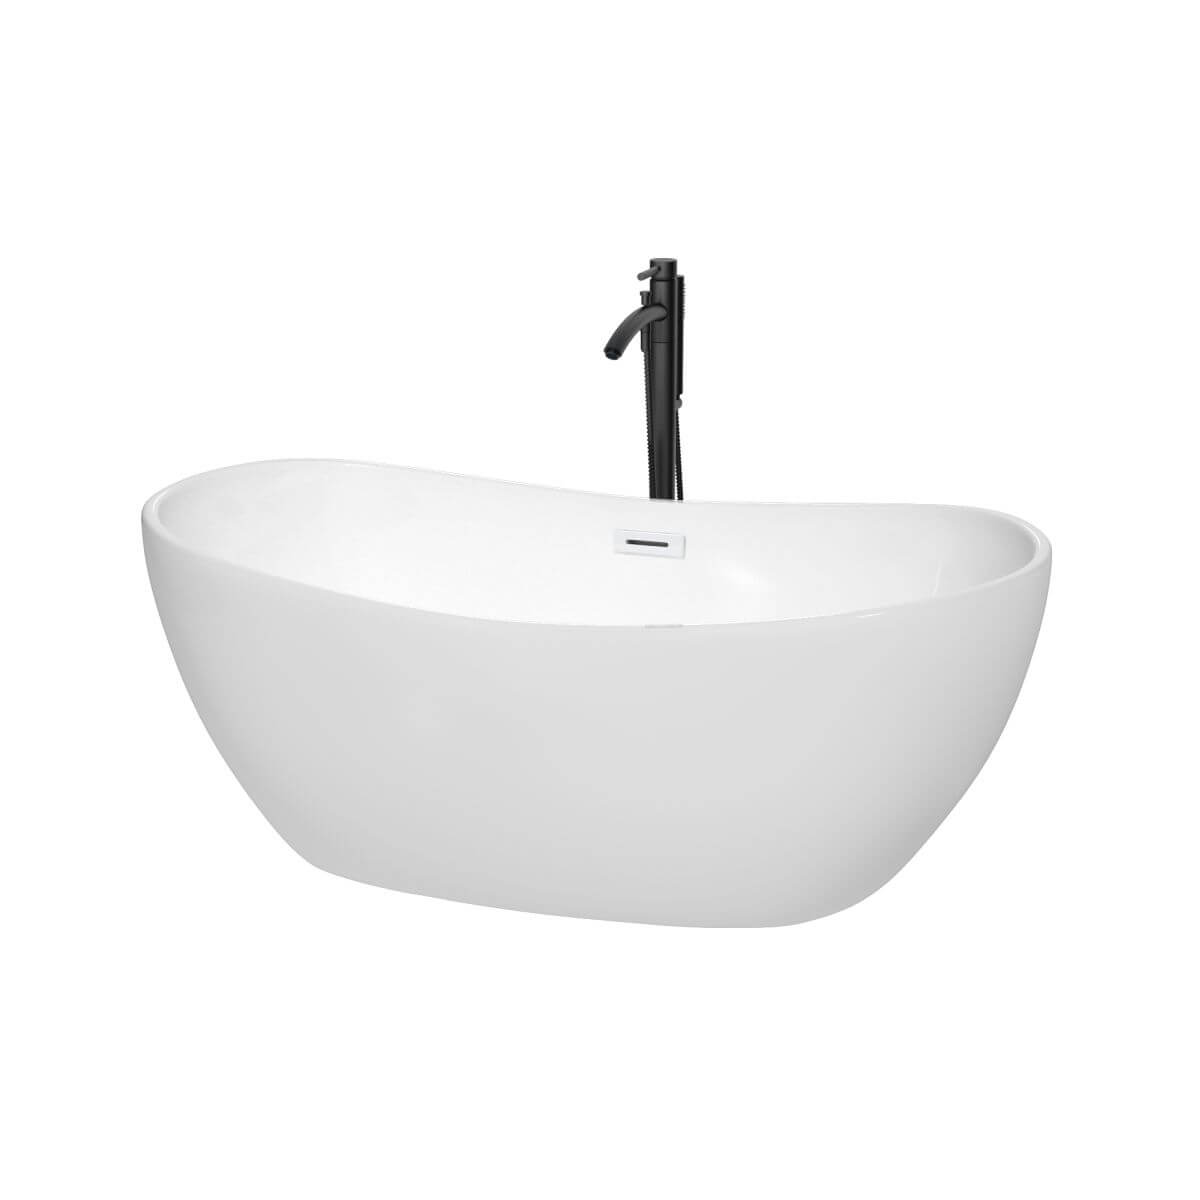 Wyndham Collection Rebecca 60 inch Freestanding Bathtub in White with Shiny White Trim and Floor Mounted Faucet in Matte Black - WCOBT101460SWATPBK